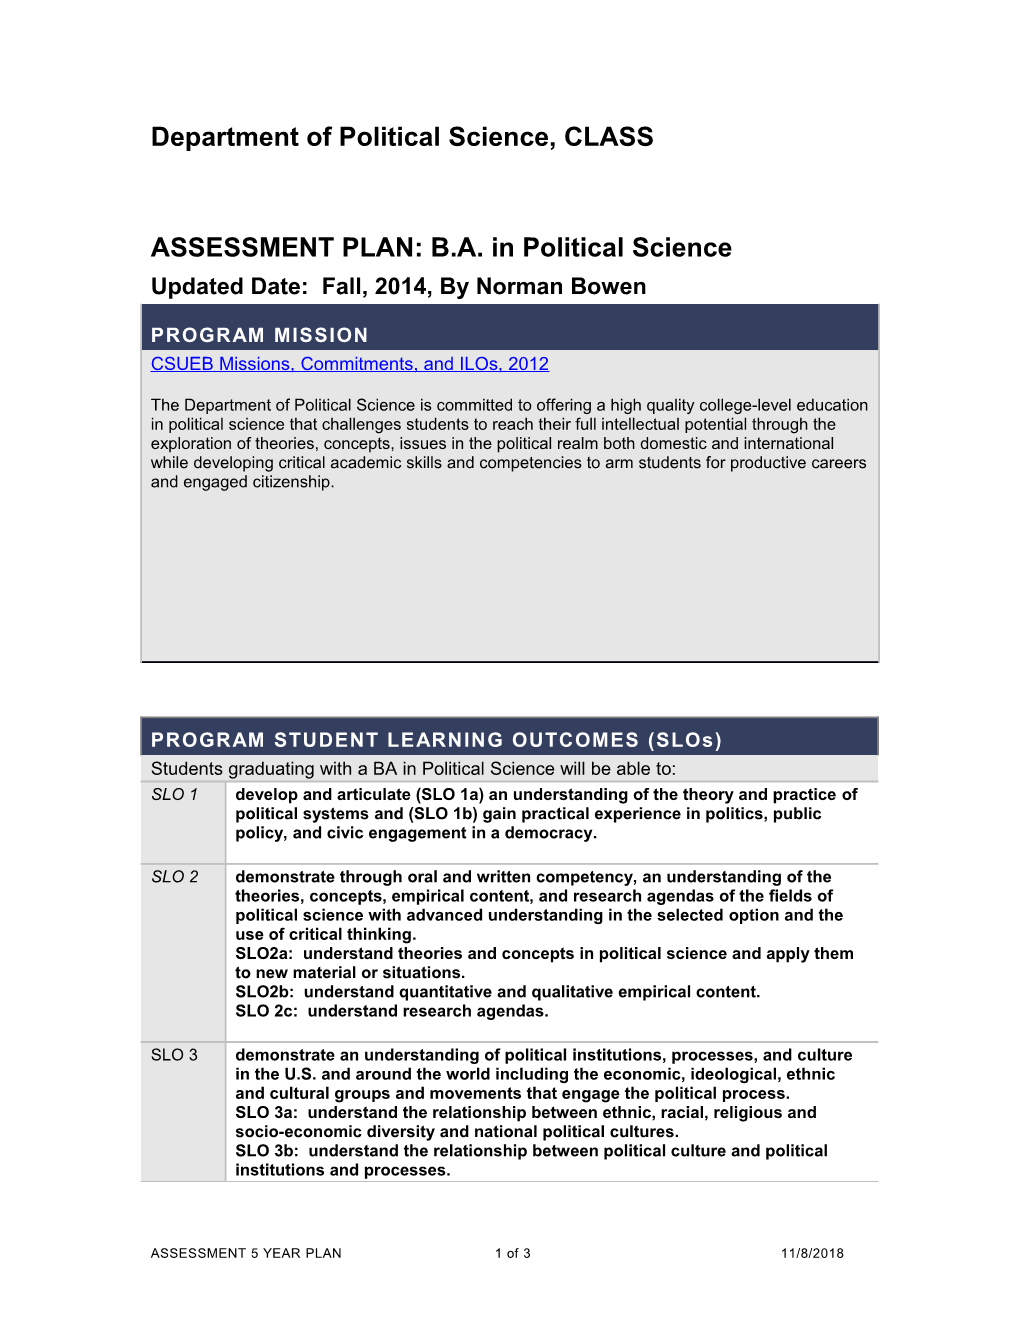 ASSESSMENT PLAN: B.A. in Political Science